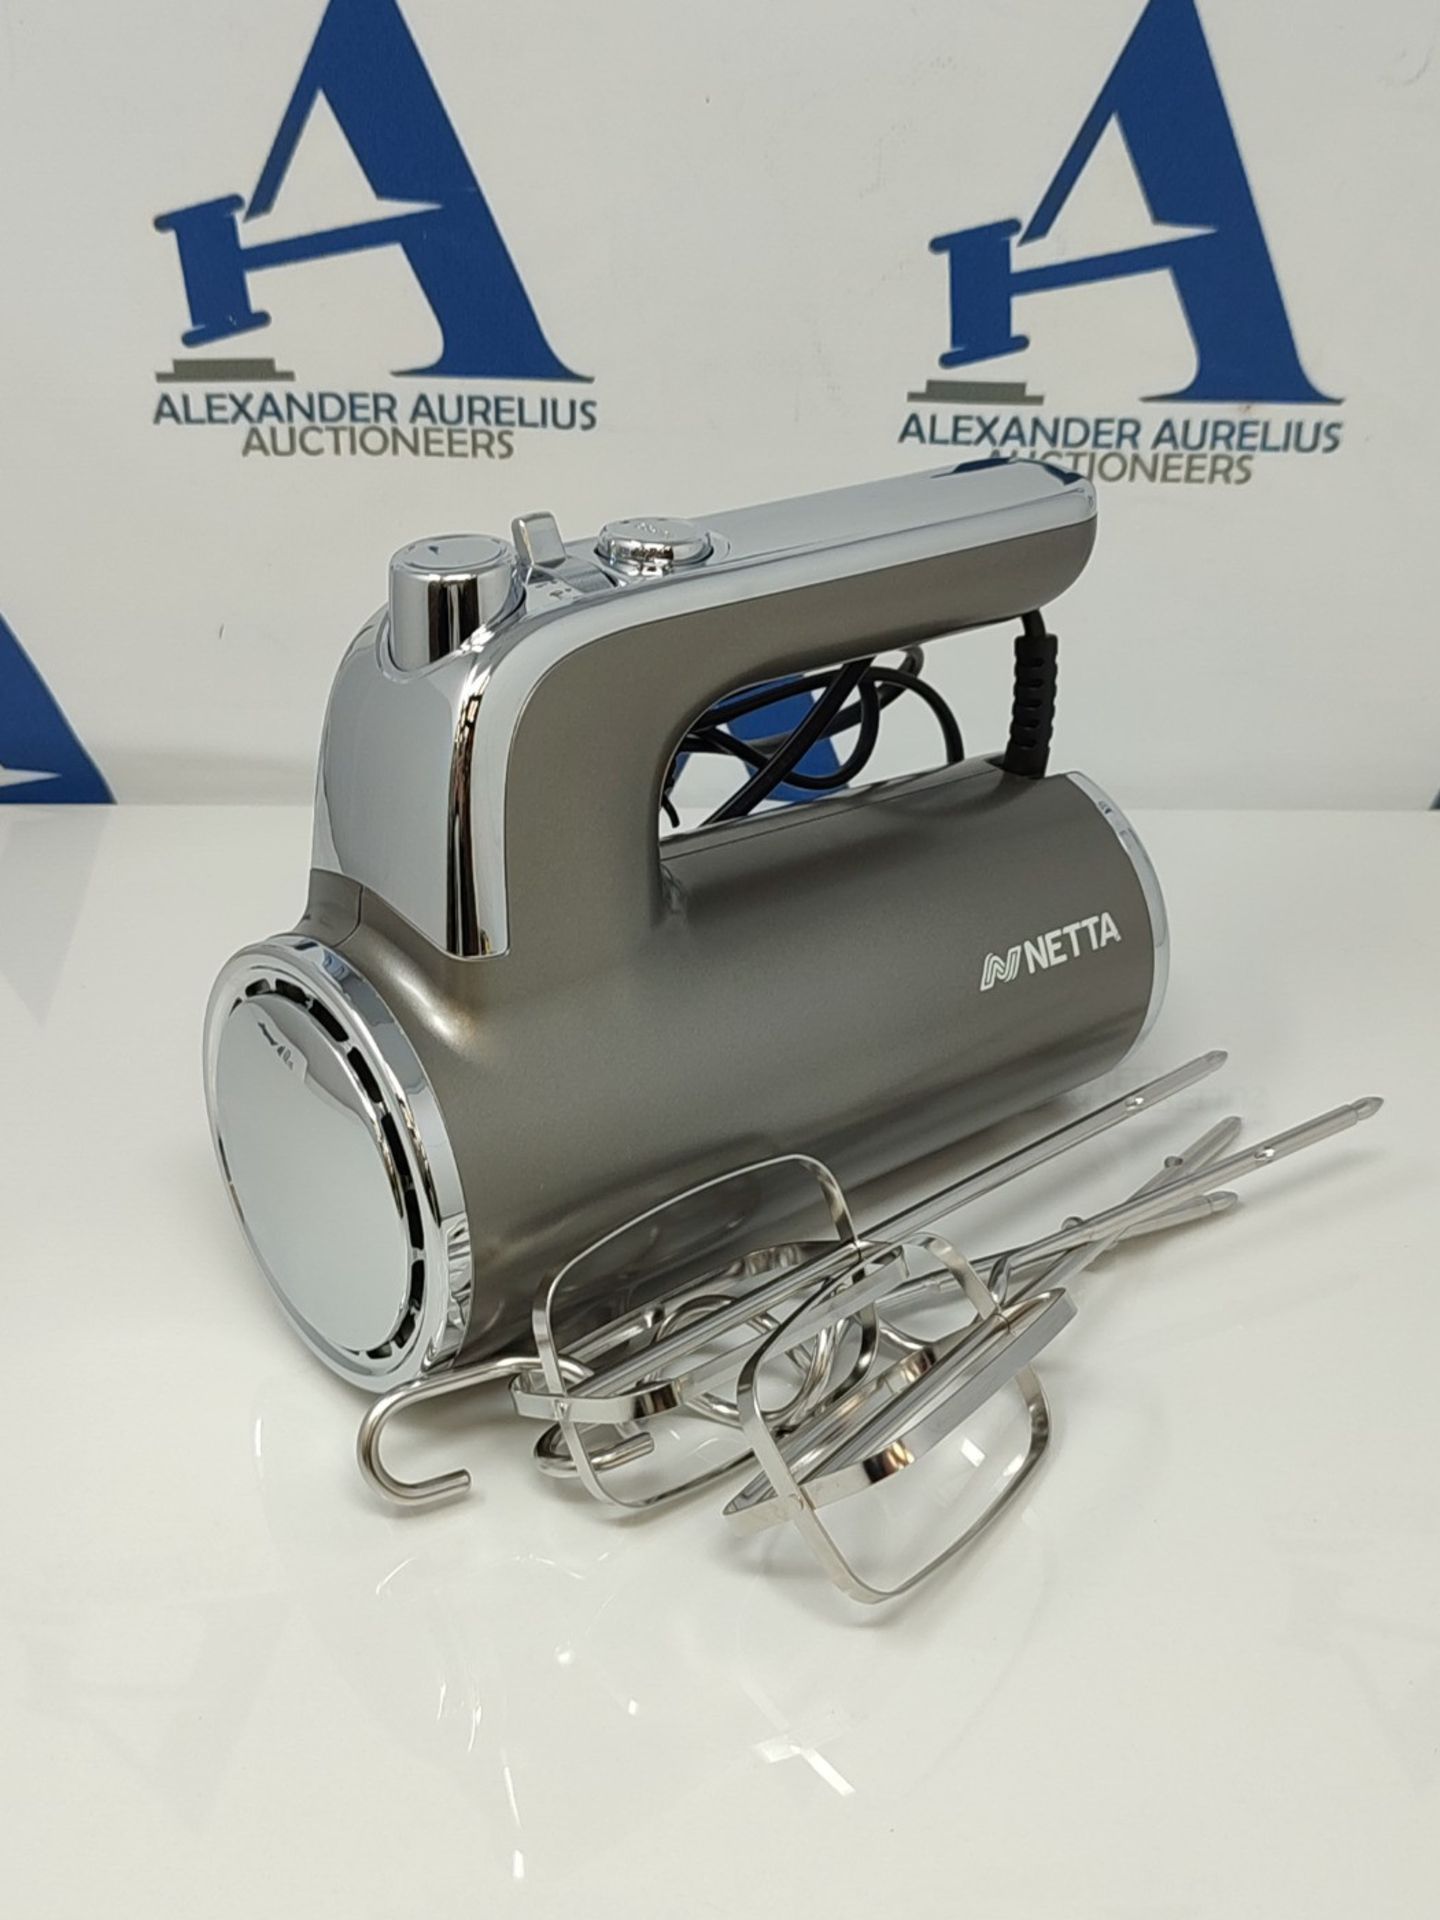 NETTA Hand Mixer - Electric Handheld Whisk - 5 Speed 400W - with Turbo and Easy Eject - Image 2 of 2